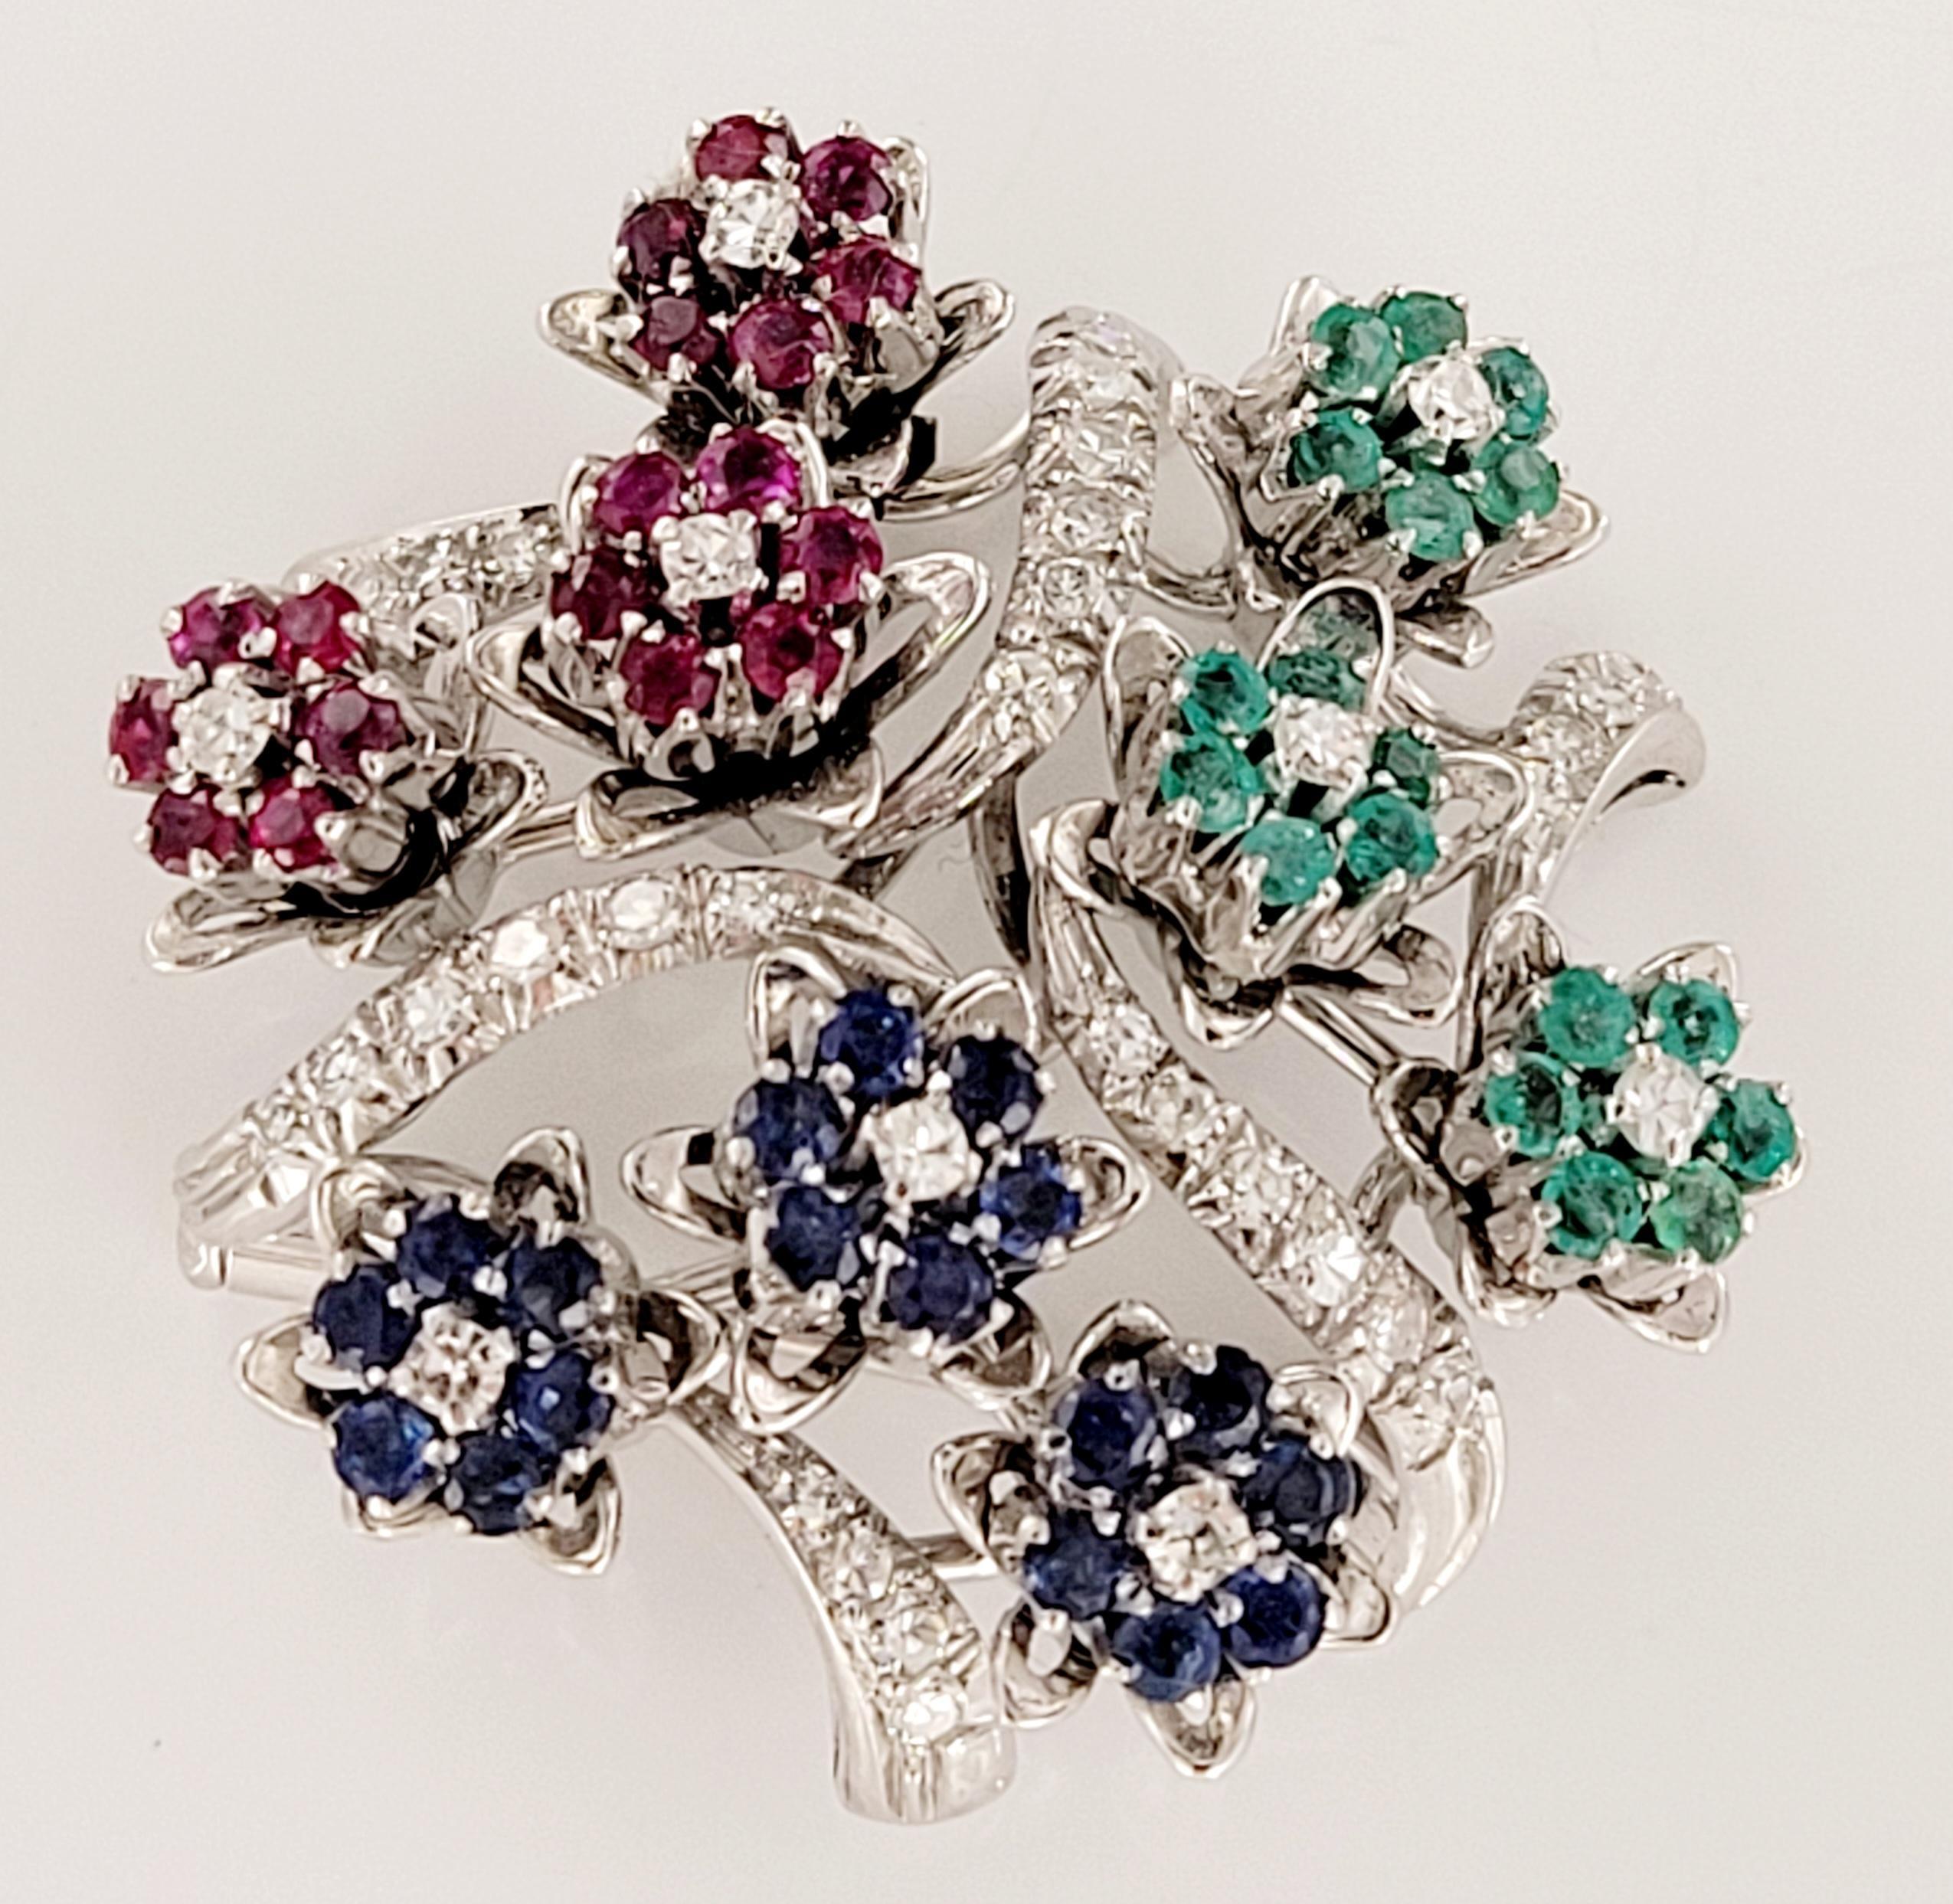 Amazing 3 gemstones and diamond vintage brooch. Emerald: 0.54 ct. Blue Sapphire: 0.50 carat weight. Ruby 0.52 carat. Dimond 0.45 carat of approximately G color and SI clarity. Set in 18K White Gold. Retail Price $4900